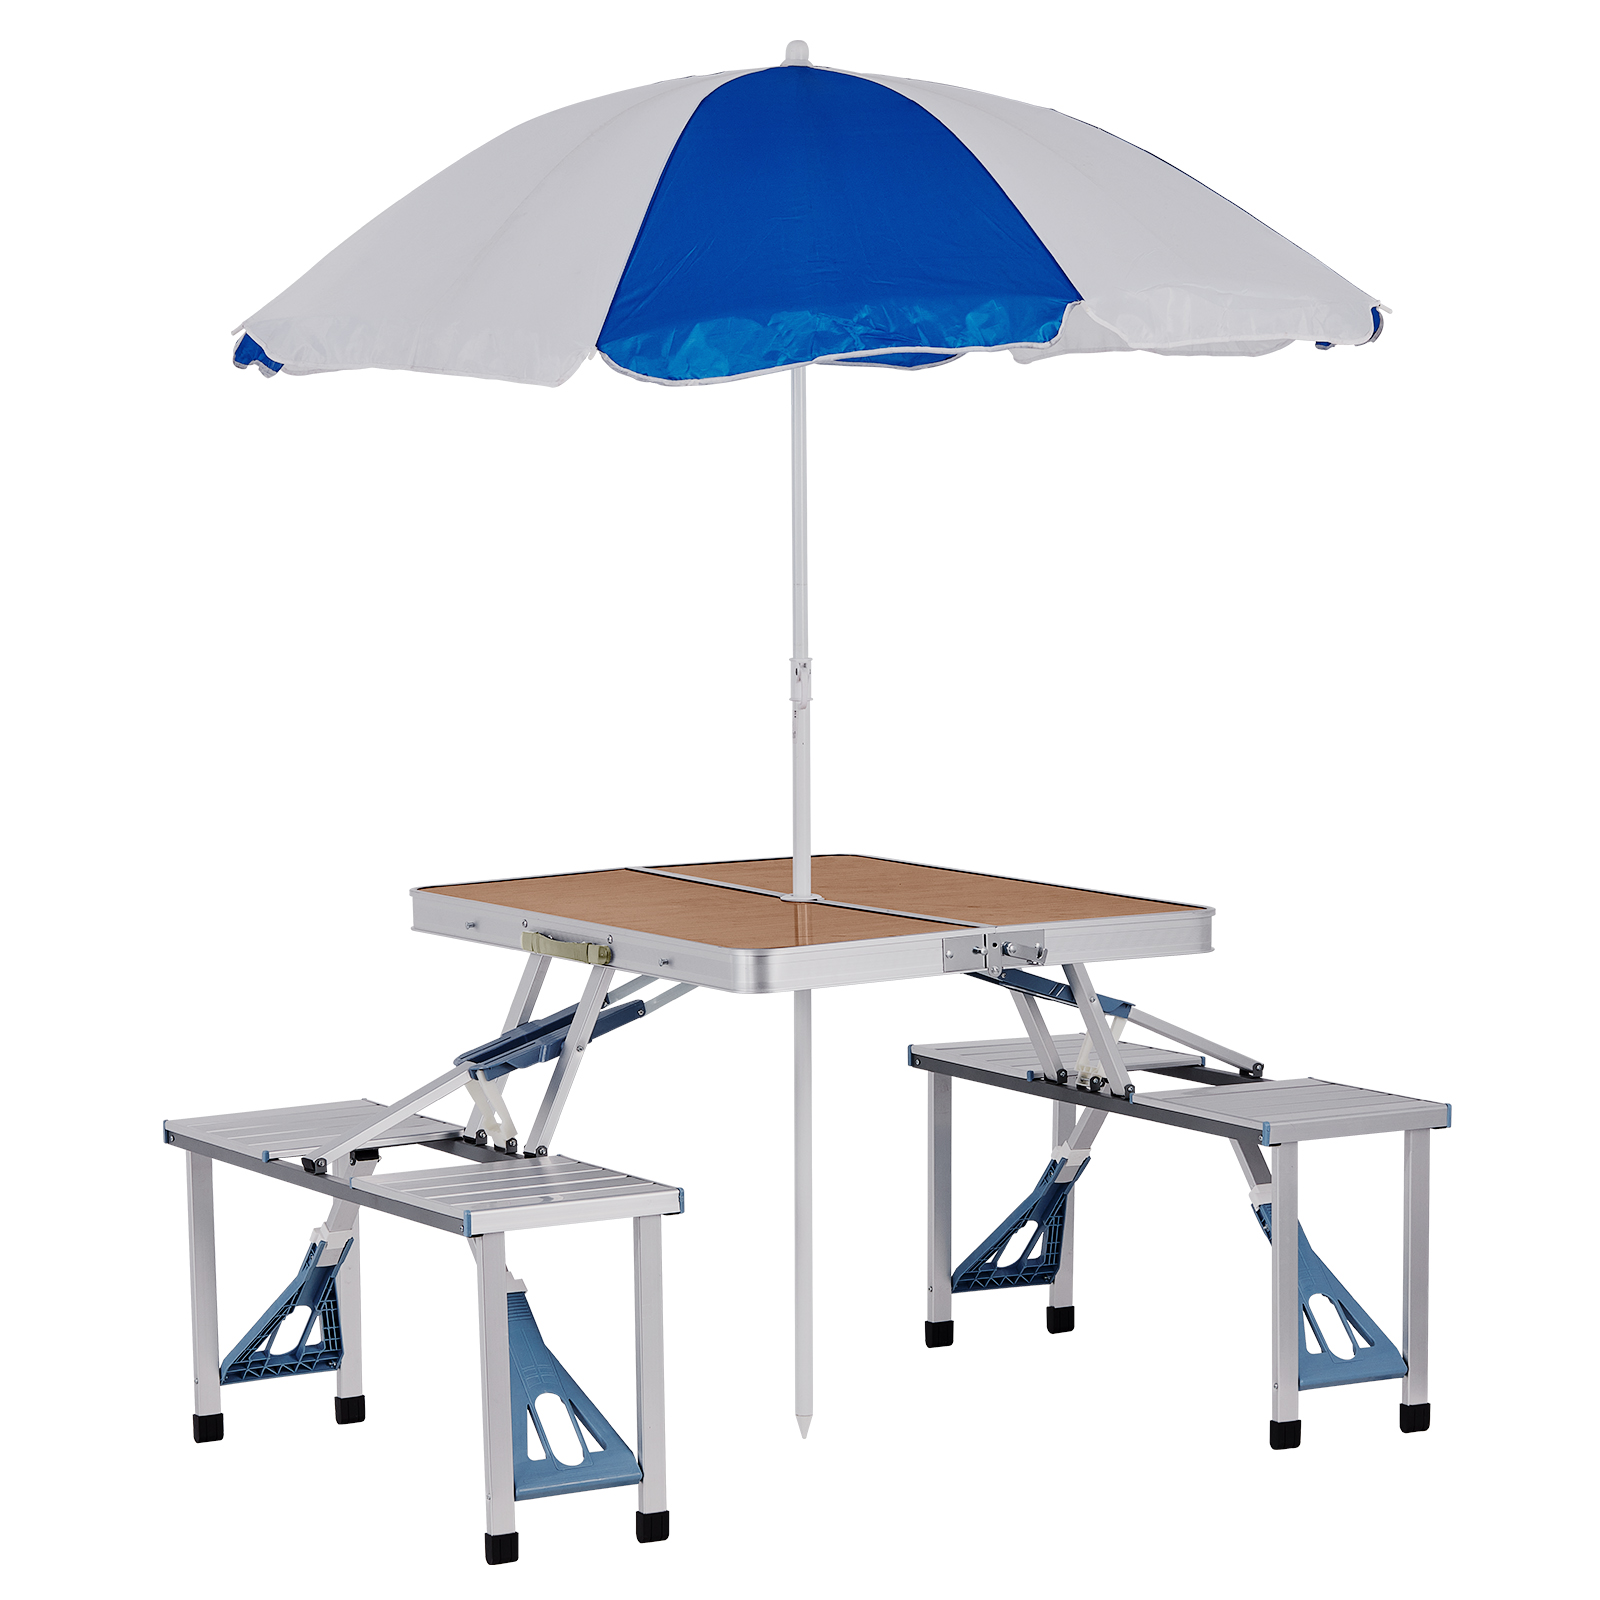 EURO SAKURA Folding Picnic Table Beach Set with Seats Chairs and Umbrella Hole Portable Camping Picnic Tables with Wooden - image 2 of 11